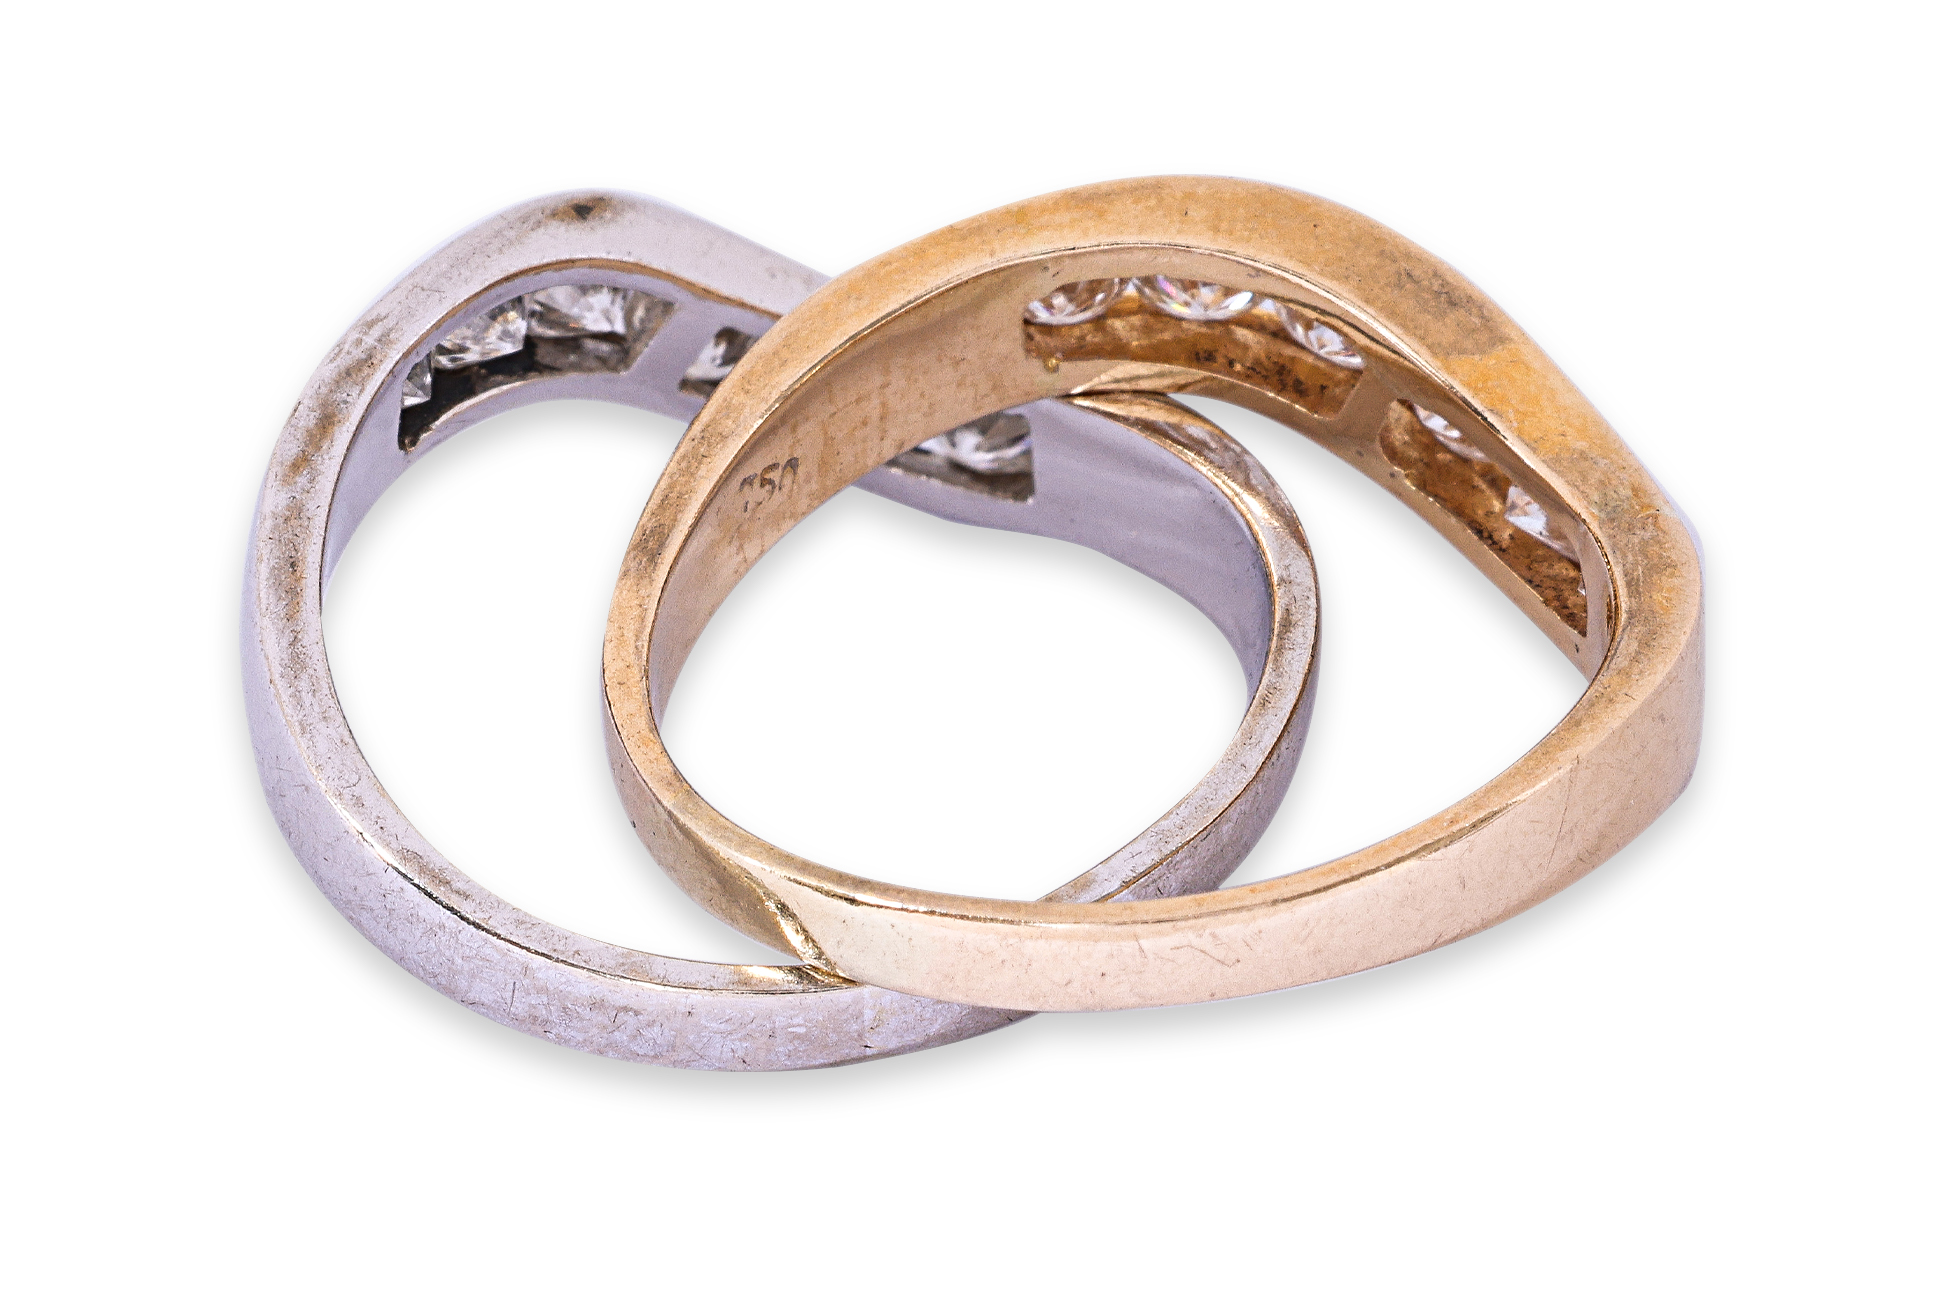 A PAIR OF STACKING DIAMOND BANDS - Image 3 of 4